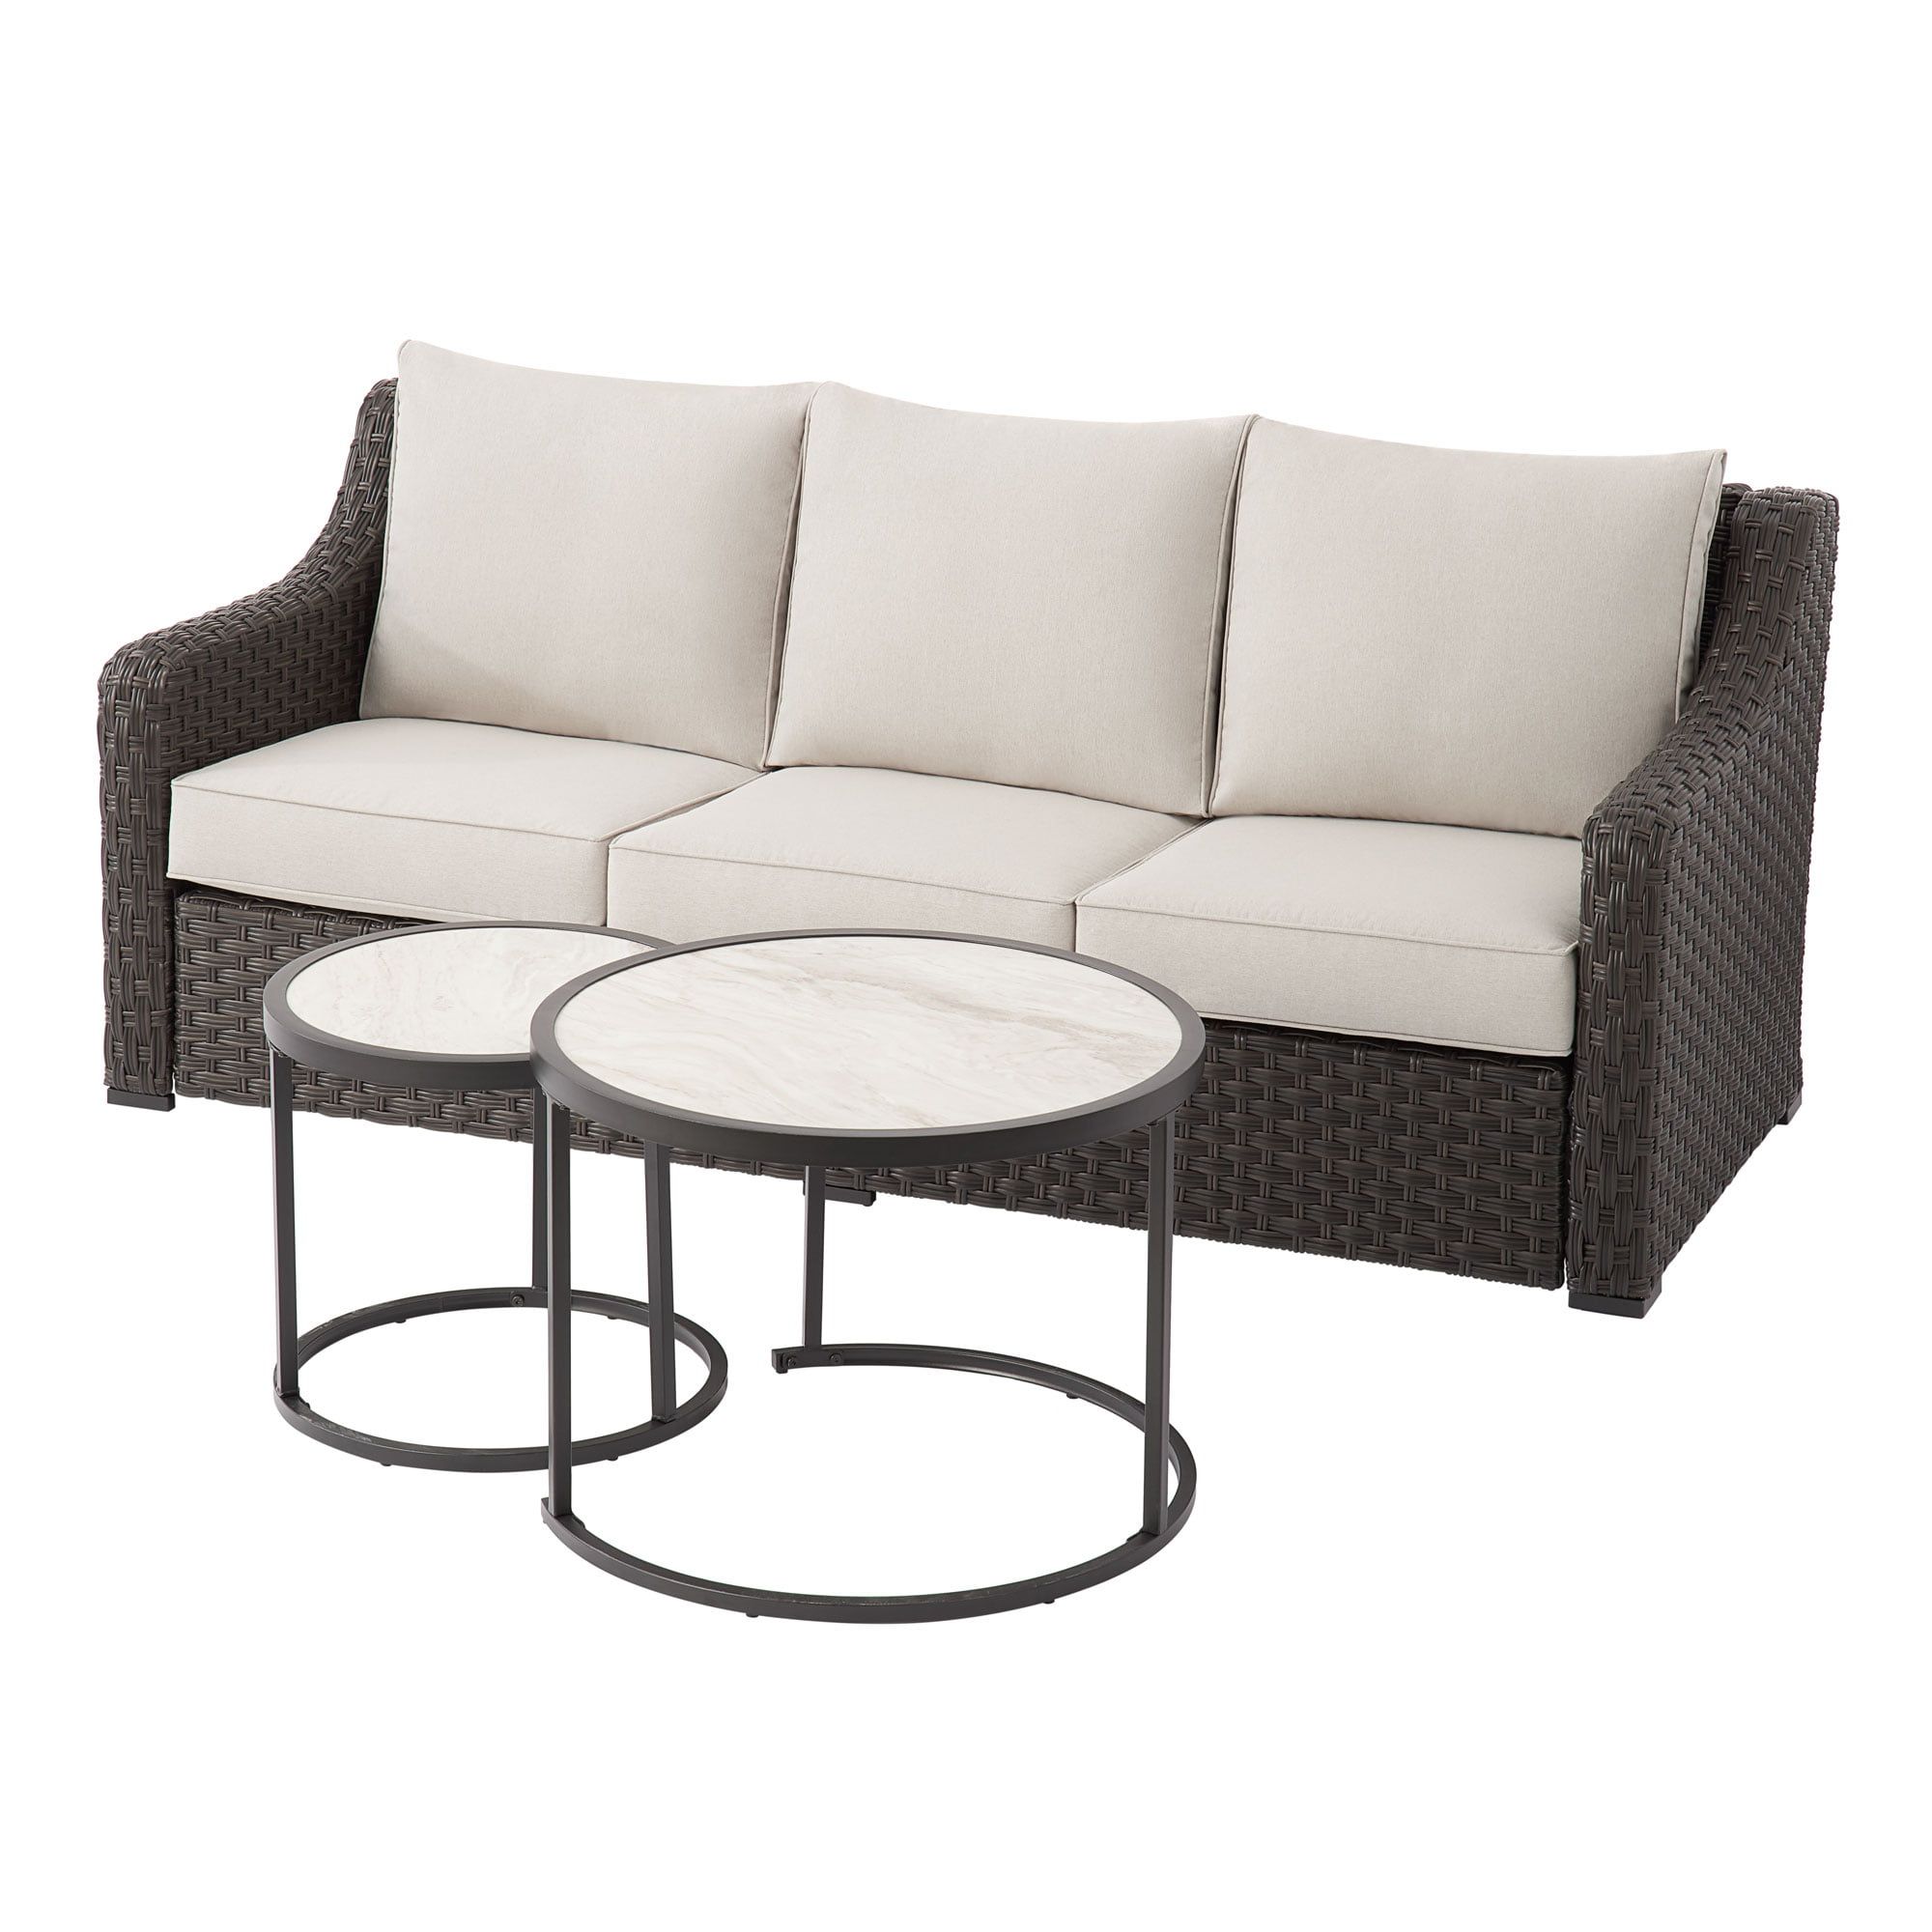 Better Homes & Gardens River Oaks 3 Piece Sofa And Nesting Tables With  Patio Cover, Dark – Walmart Pertaining To 3 Piece Sofa &amp; Nesting Table Set (View 7 of 15)